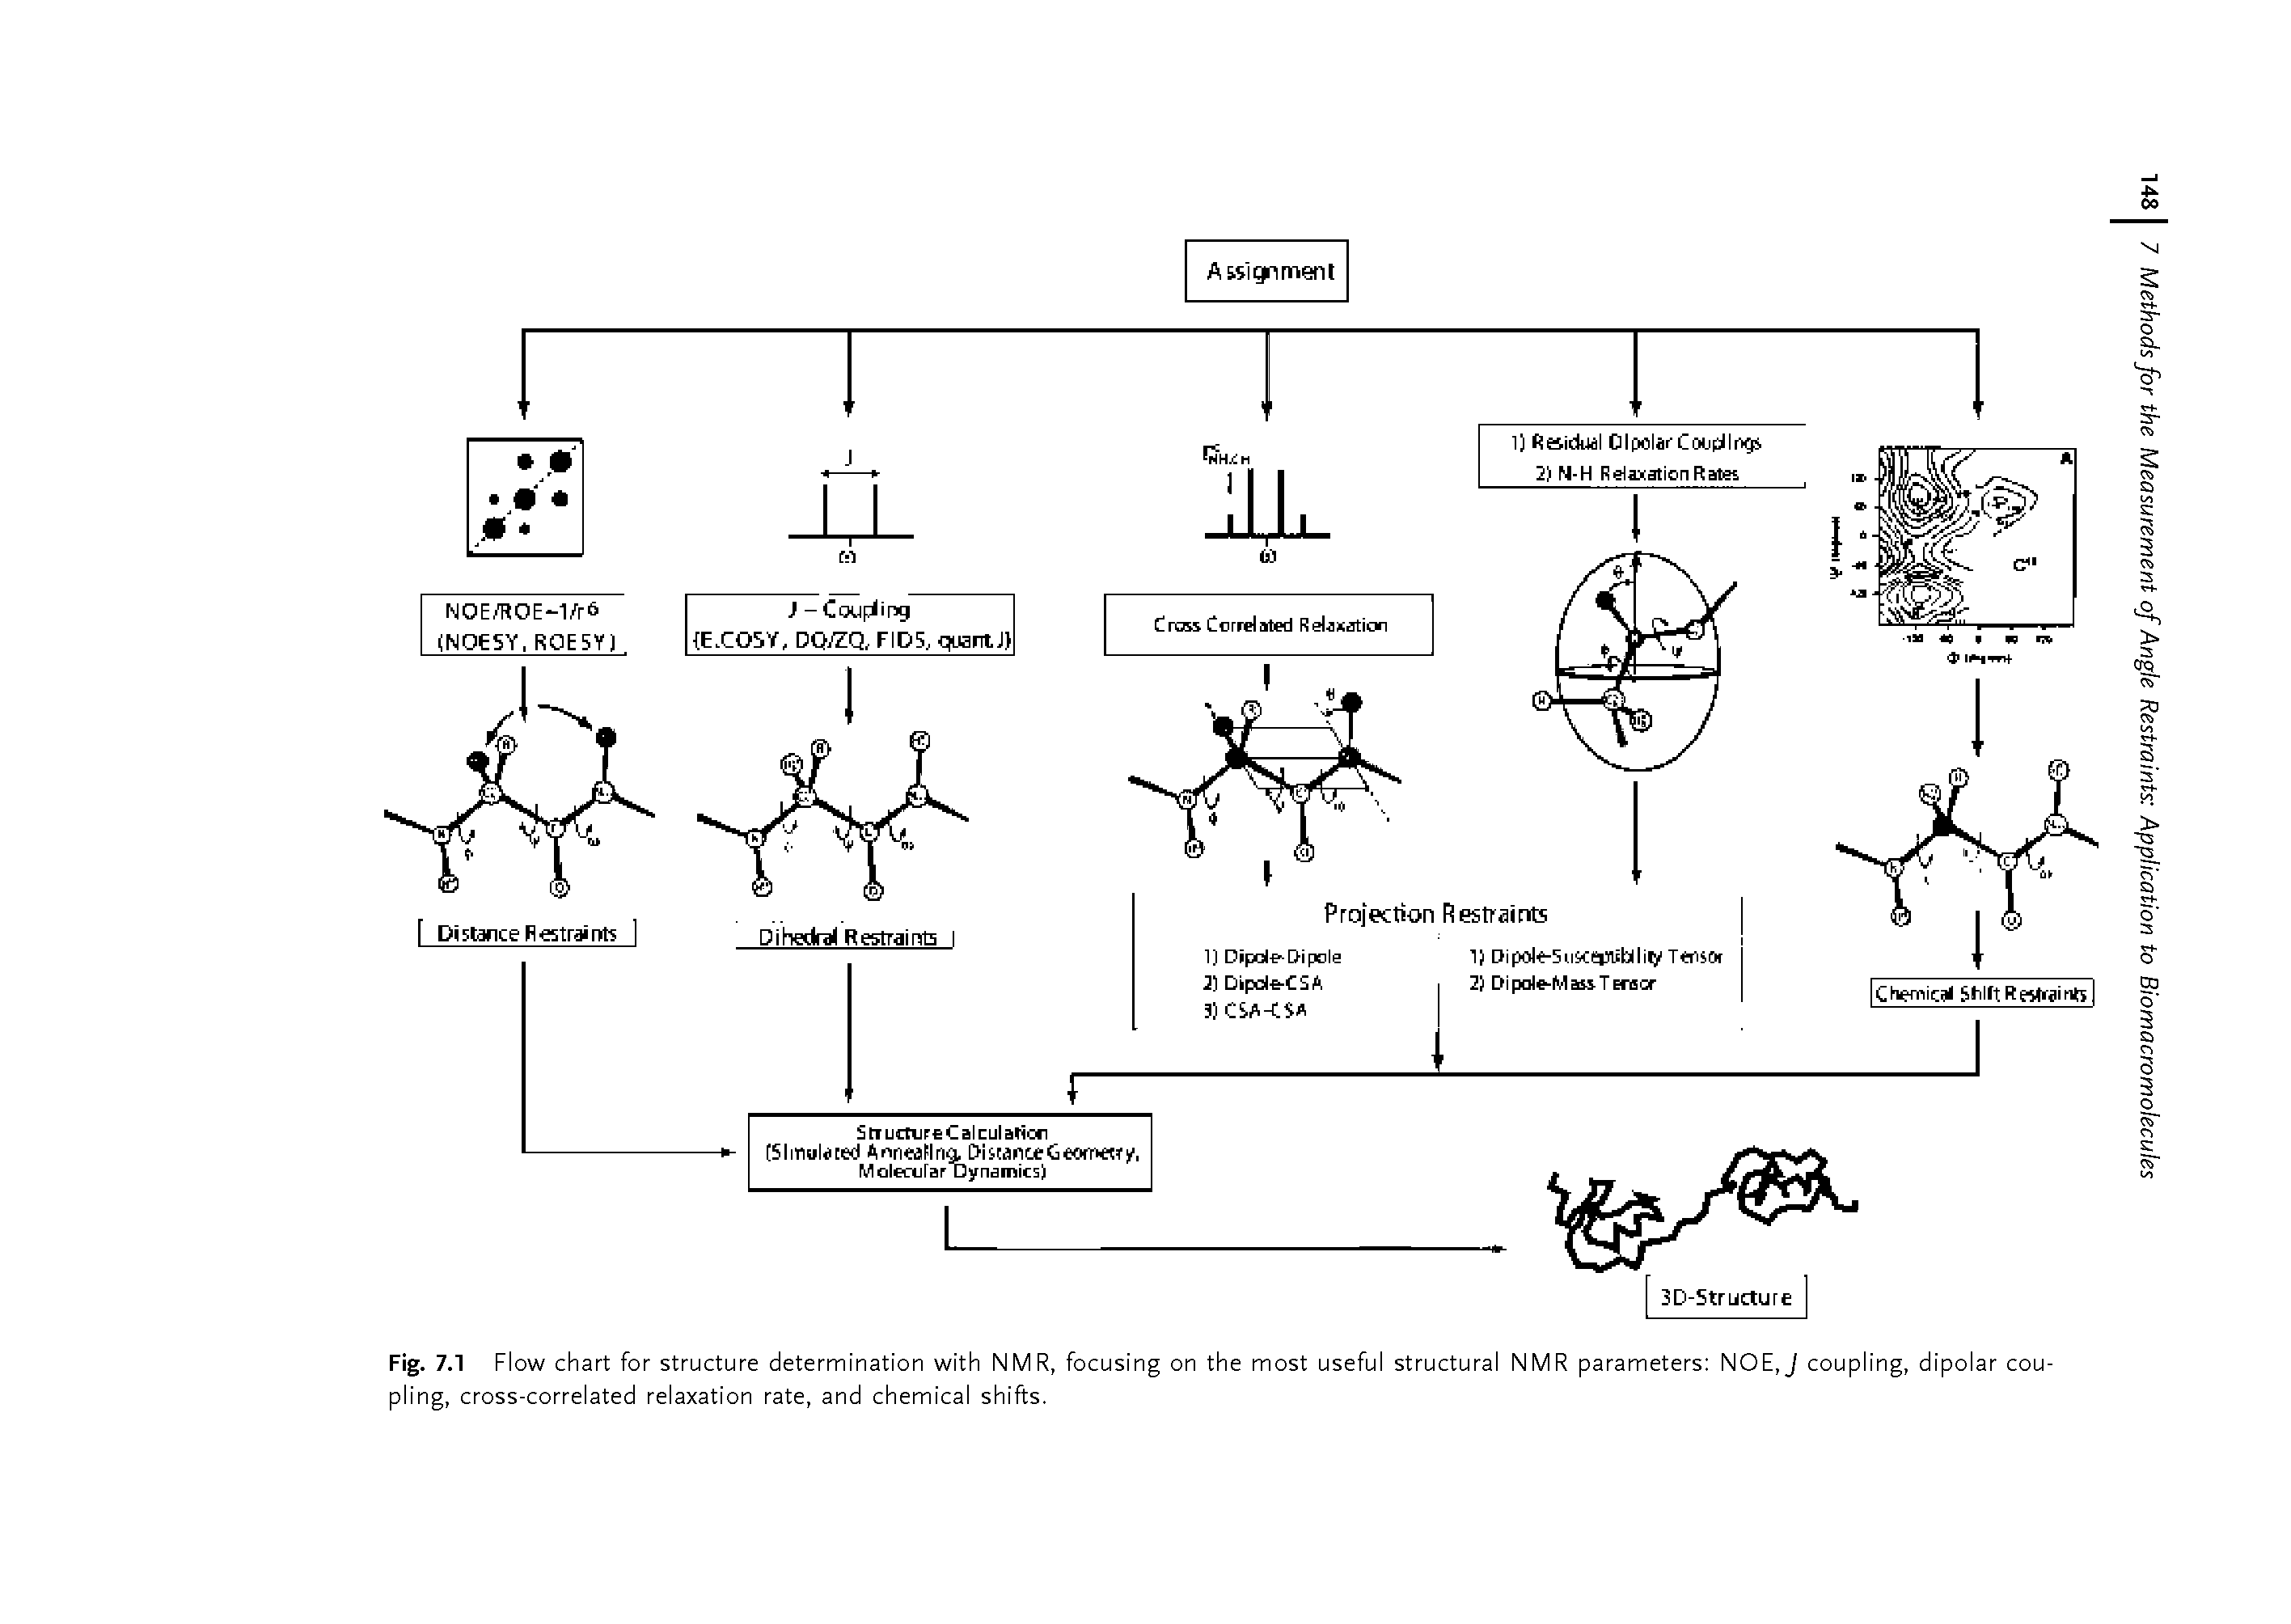 Fig. 7.1 Flow chart for structure determination with NMR, focusing on the most useful structural NMR parameters NOE,J coupling, dipolar coupling, cross-correlated relaxation rate, and chemical shifts.